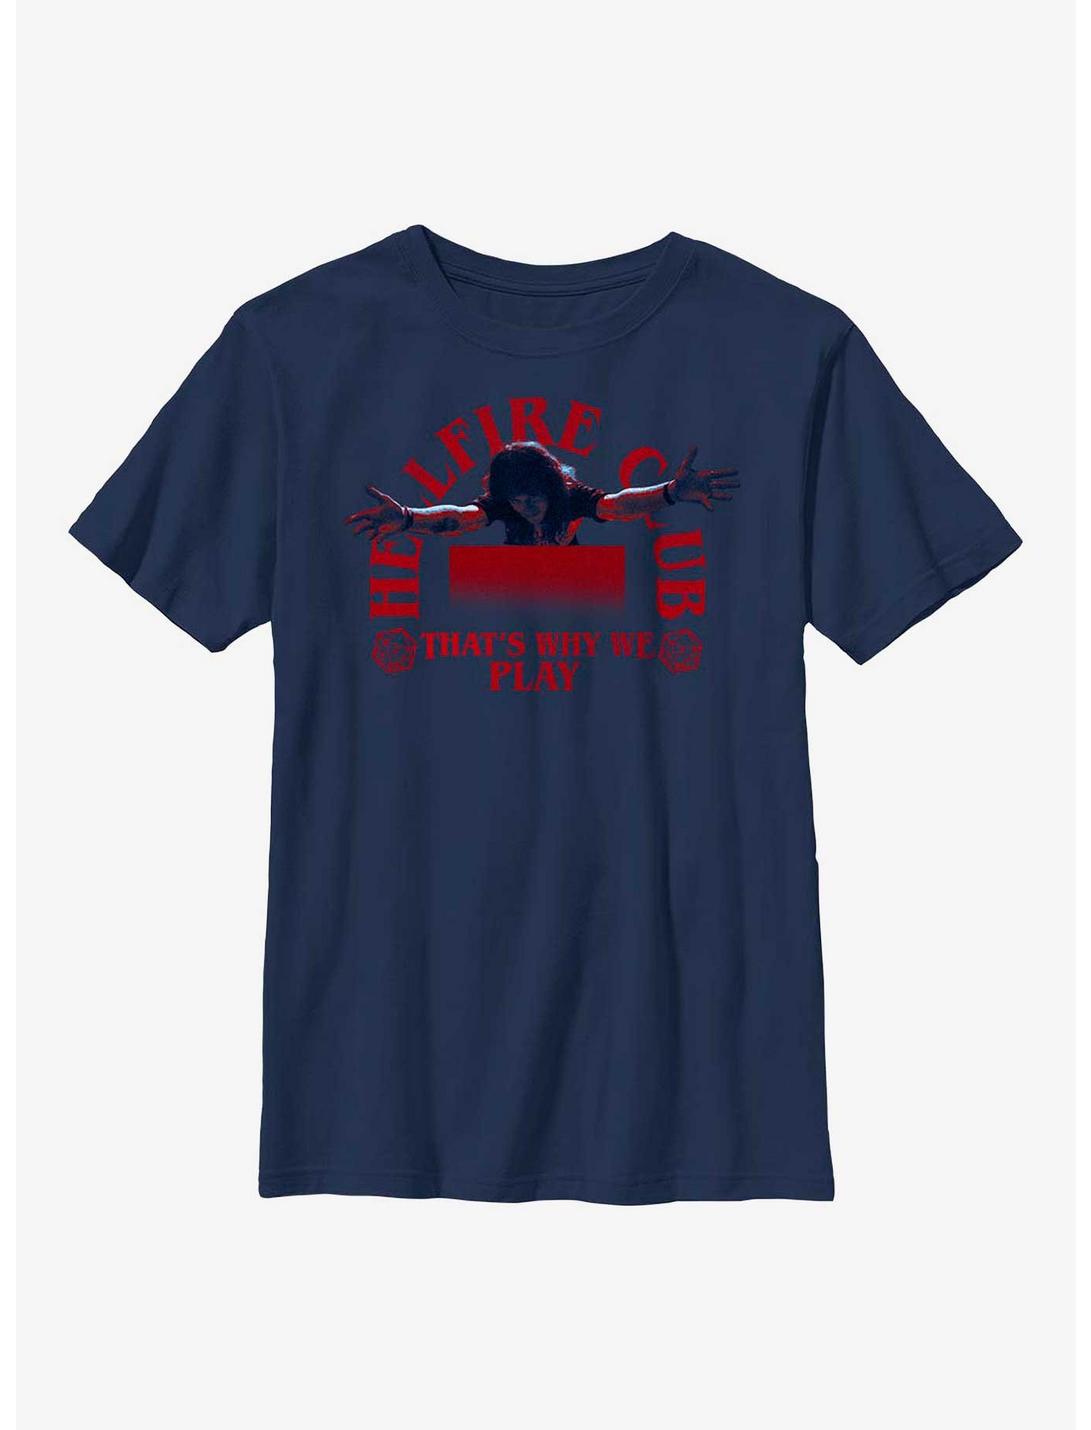 Stranger Things Hellfire Club That's Why We Play Youth T-Shirt, NAVY, hi-res